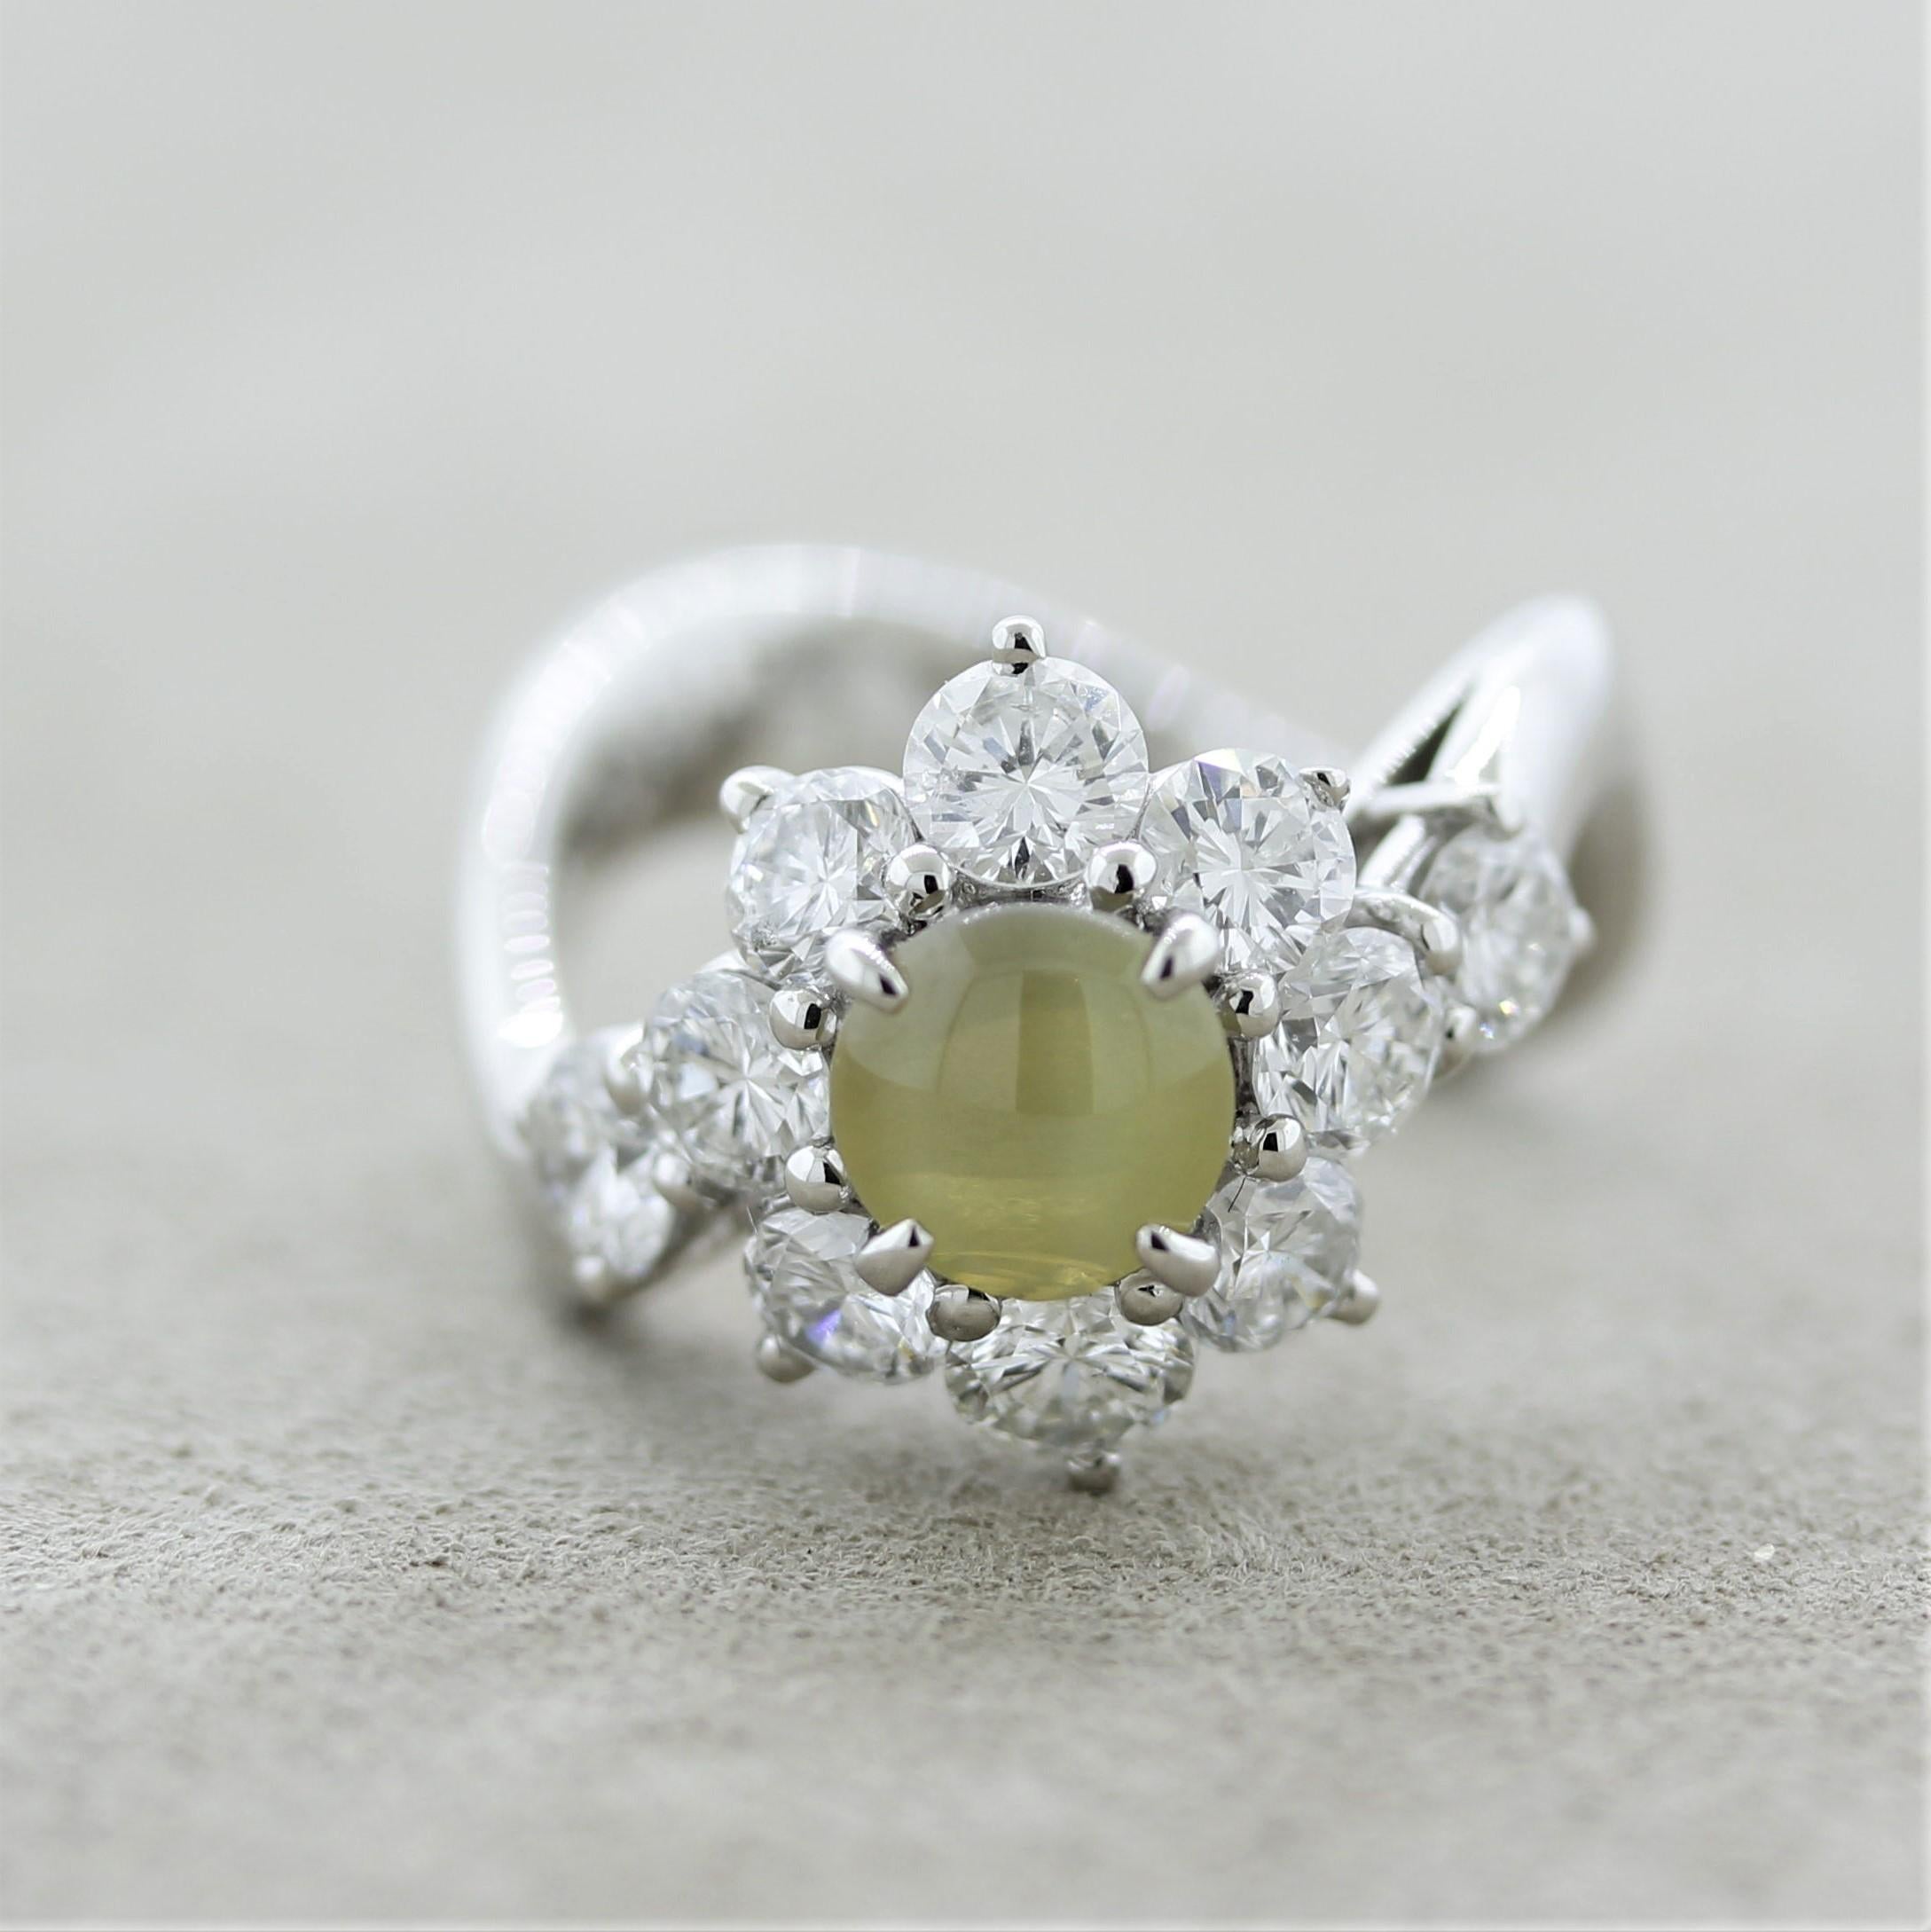 A beautiful cats eye chrysoberyl takes center stage of this platinum made ring. It has an extra fine eye as well as the classic “milk & honey” color which is so hard to find (it weighs 1.74 carats). It is complemented by 2.00 carats of large round